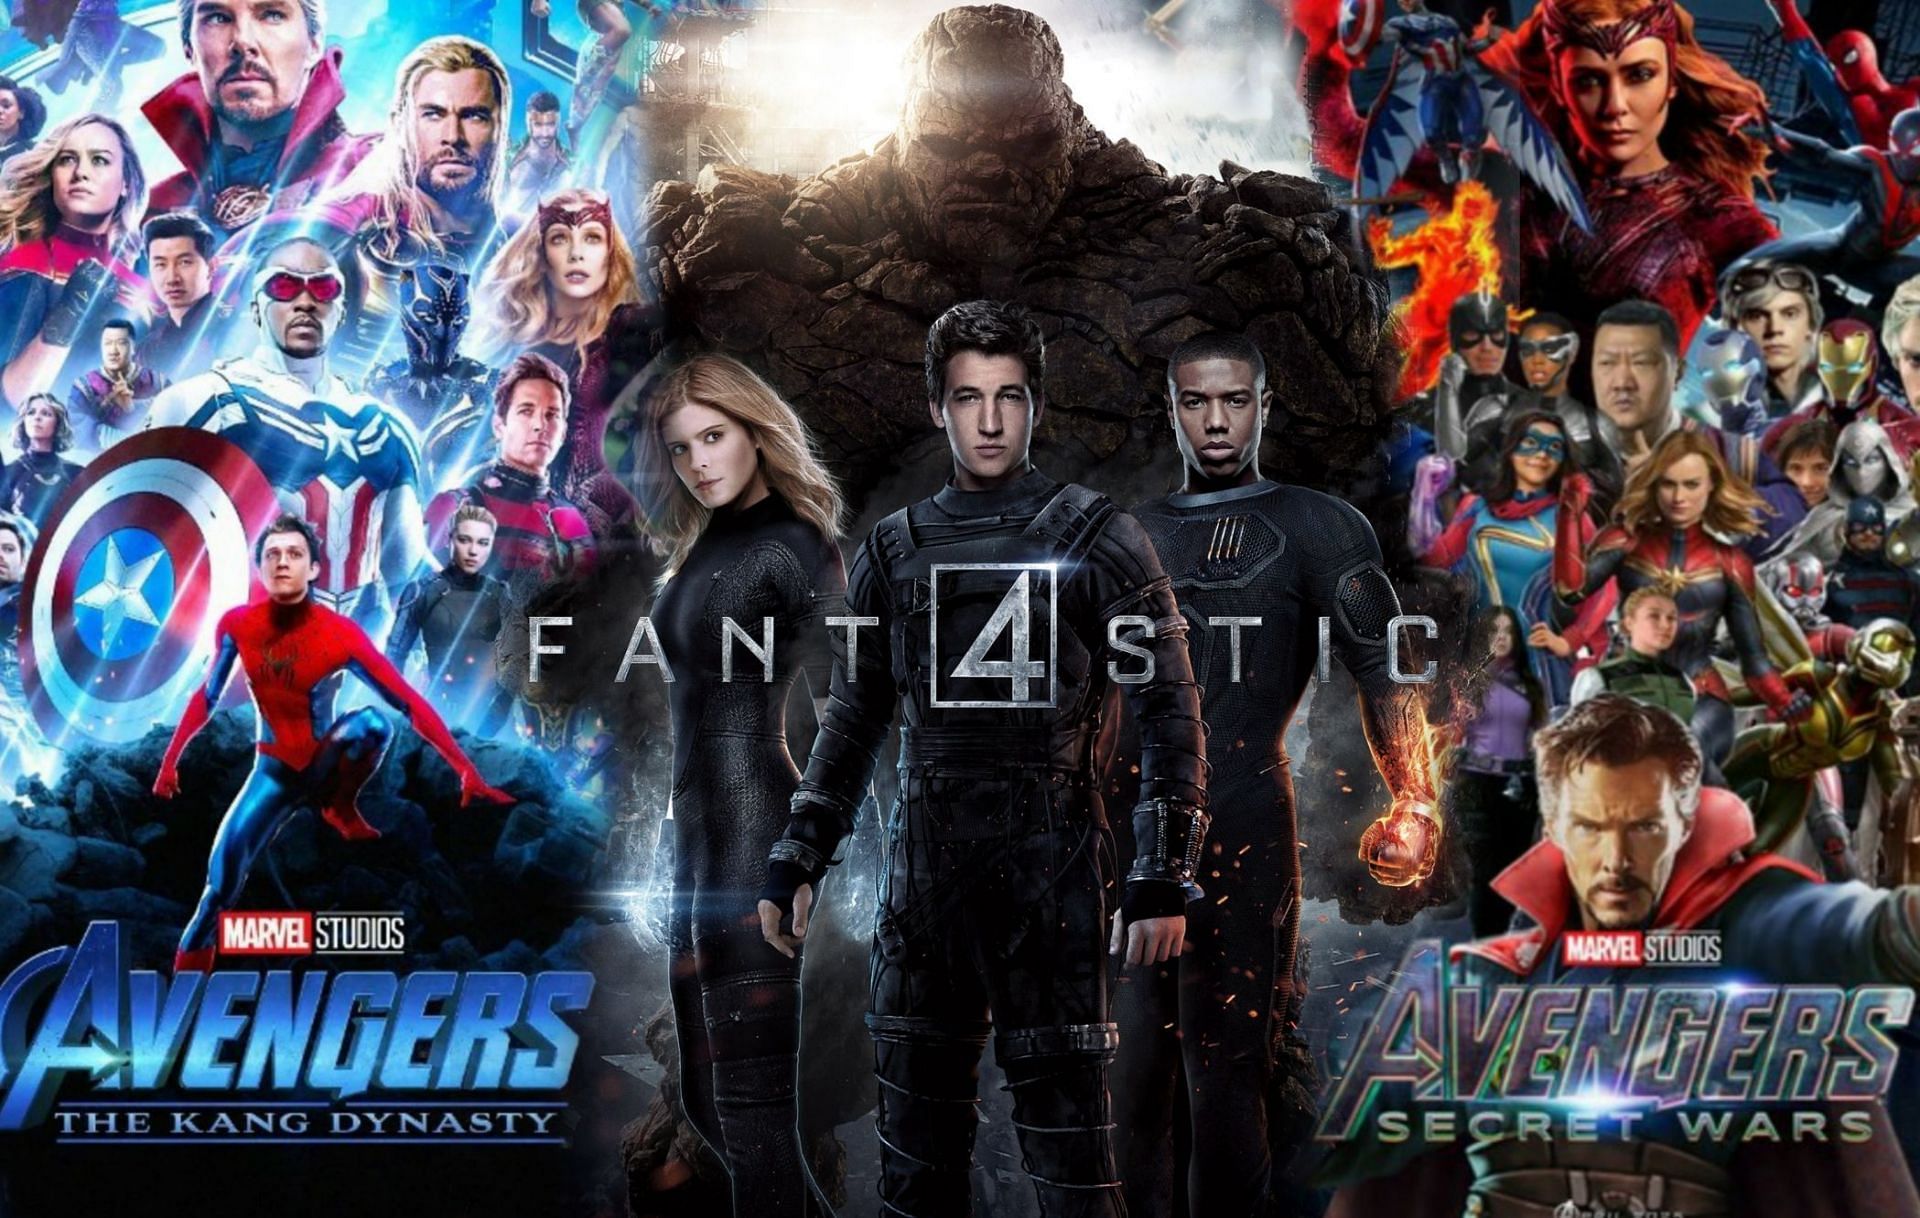 The release date for Fantastic Four, The Kang Dynasty, and Avengers: Secret Wars are unexpectedly delayed. (Image via Sportskeeda)